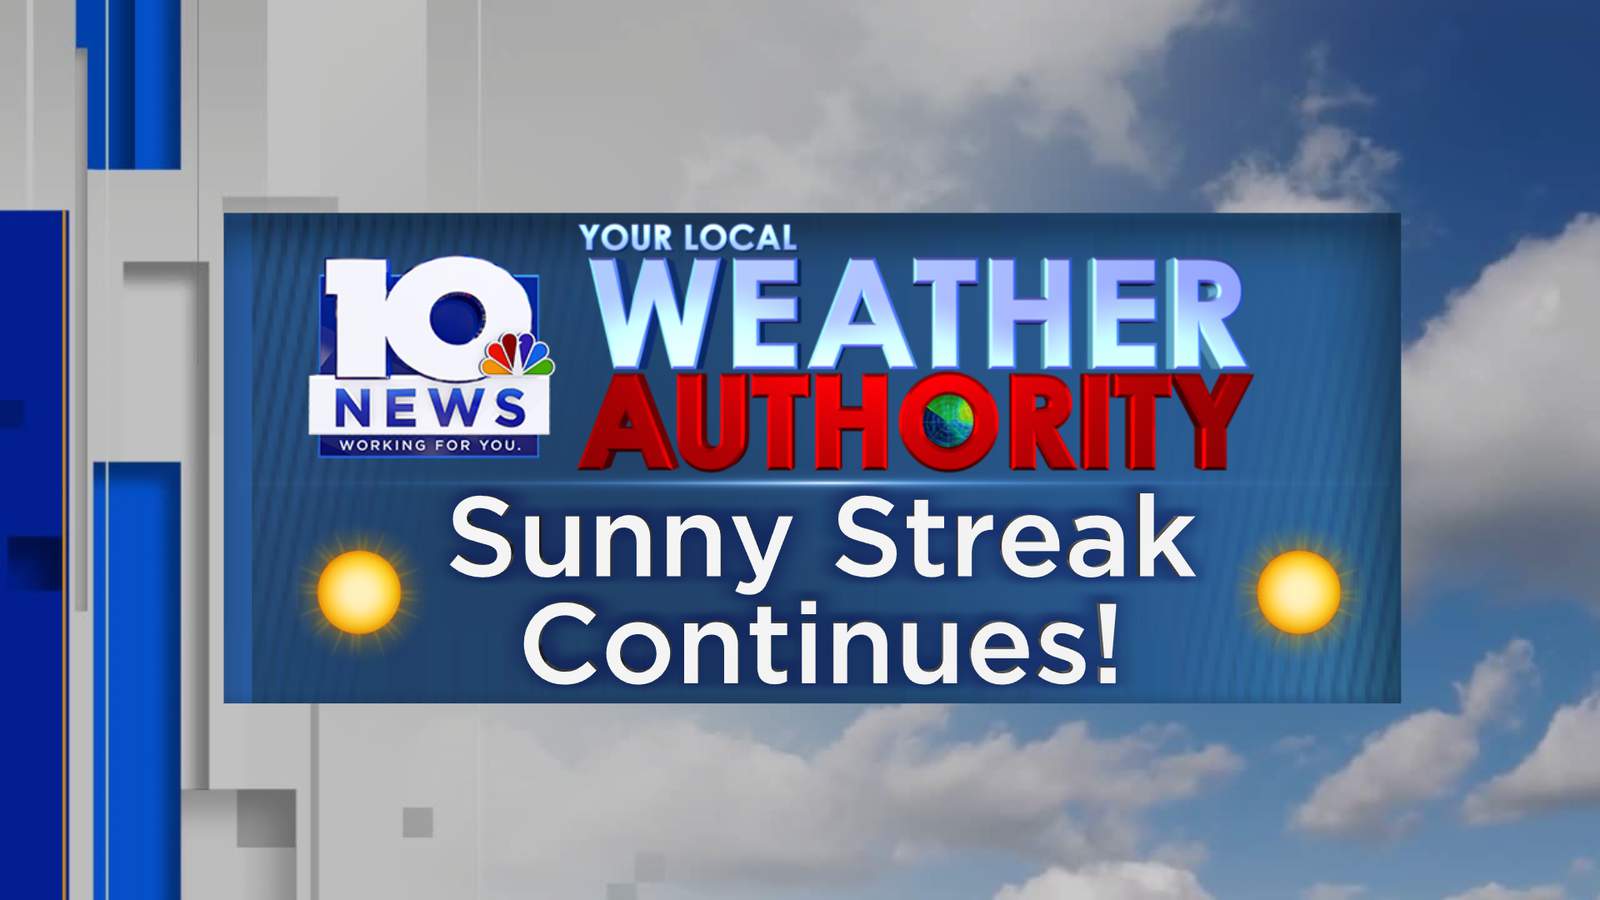 Whew...weekend cool-down won’t get in the way of our sunny streak!